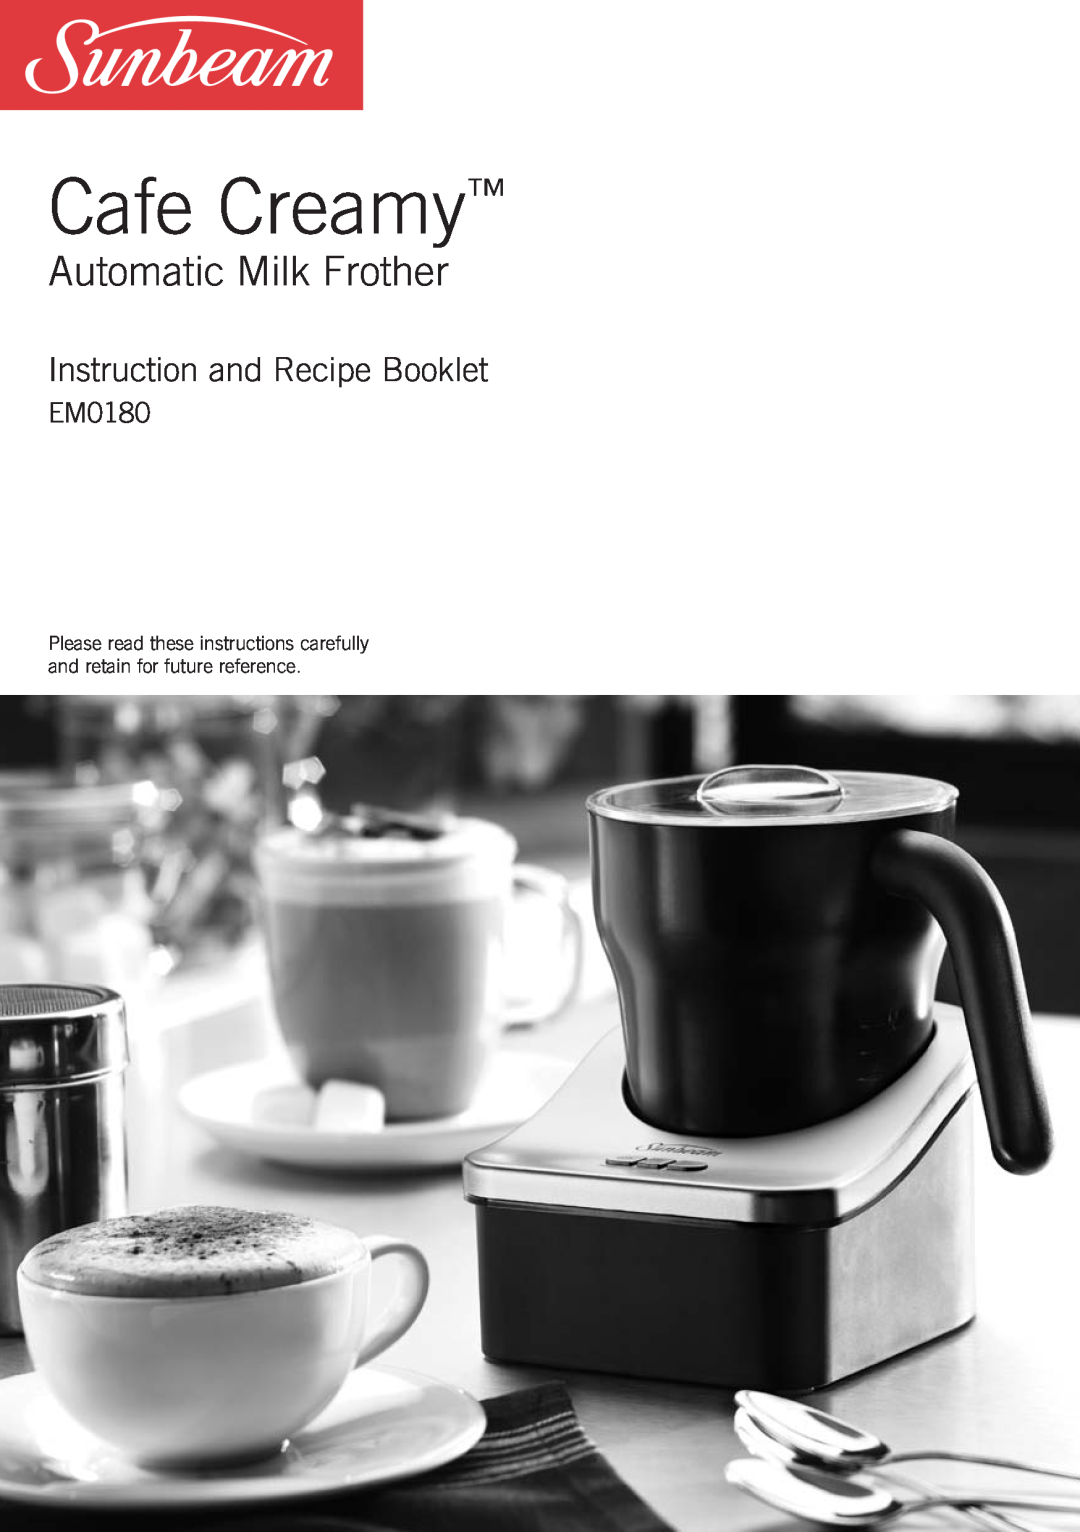 Sunbeam EM0180, SM8650 manual Cafe Creamy, Automatic Milk Frother, Instruction and Recipe Booklet 